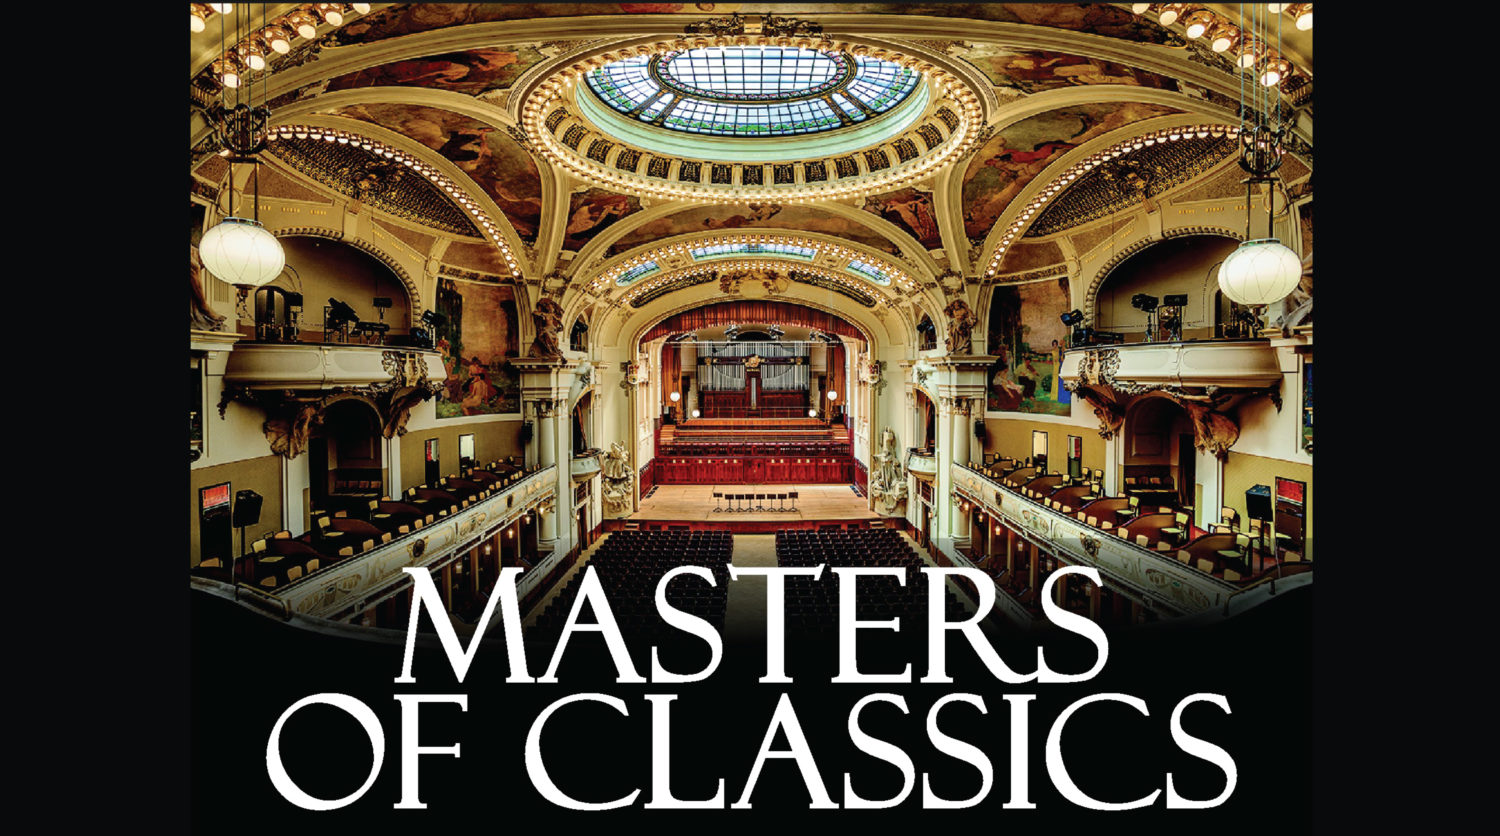 MASTERS OF CLASSICS IN THE MUNICIPAL HOUSE 19.11.2019